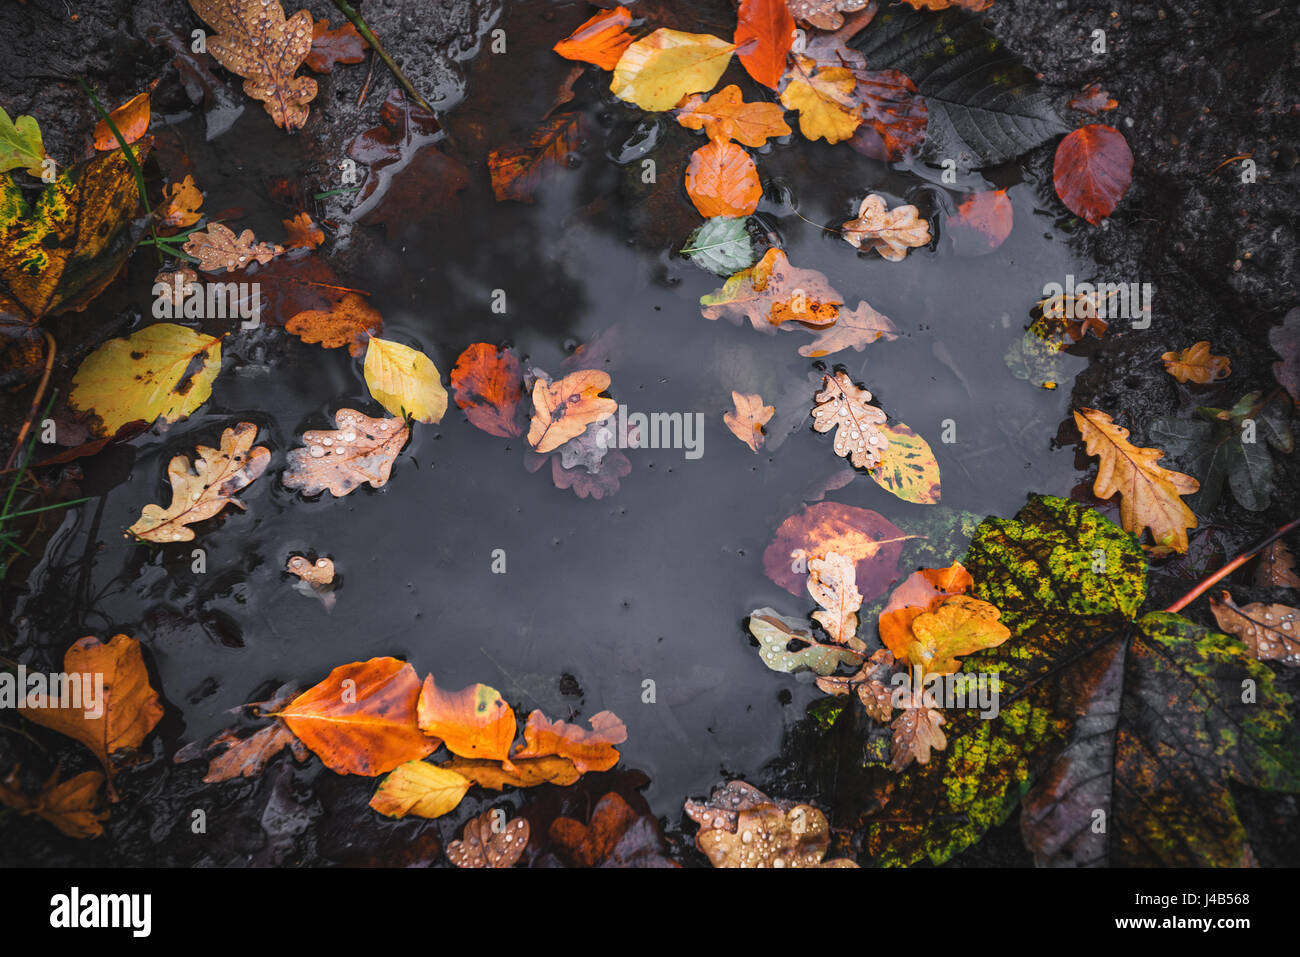 Autumn puddle after the rain with colorful autumn leaves in the dark water in autumn colors in the fall Stock Photo